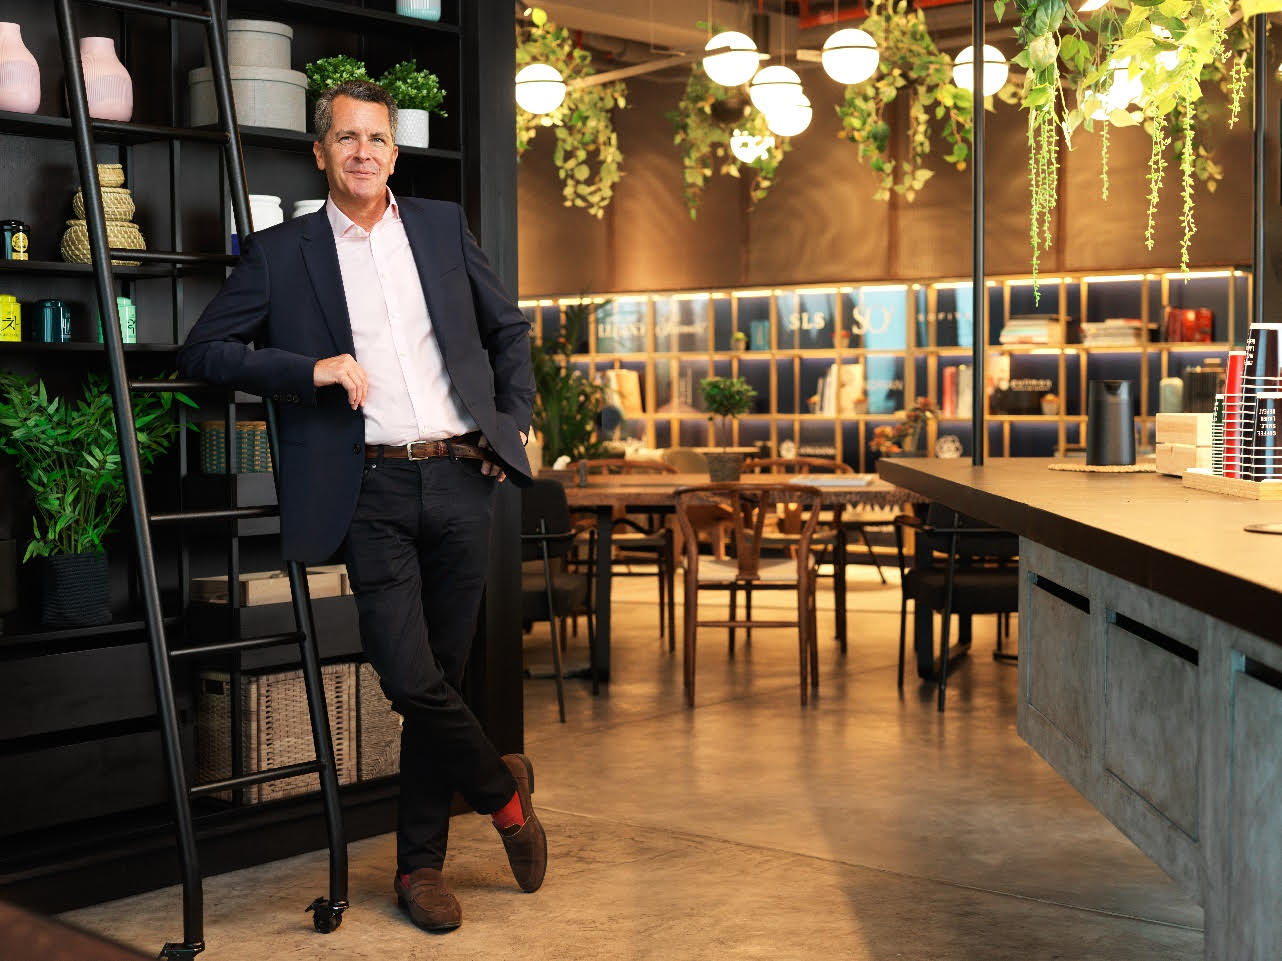 Accor appoints Philip Mahoney as Vice-President of Food & Beverage